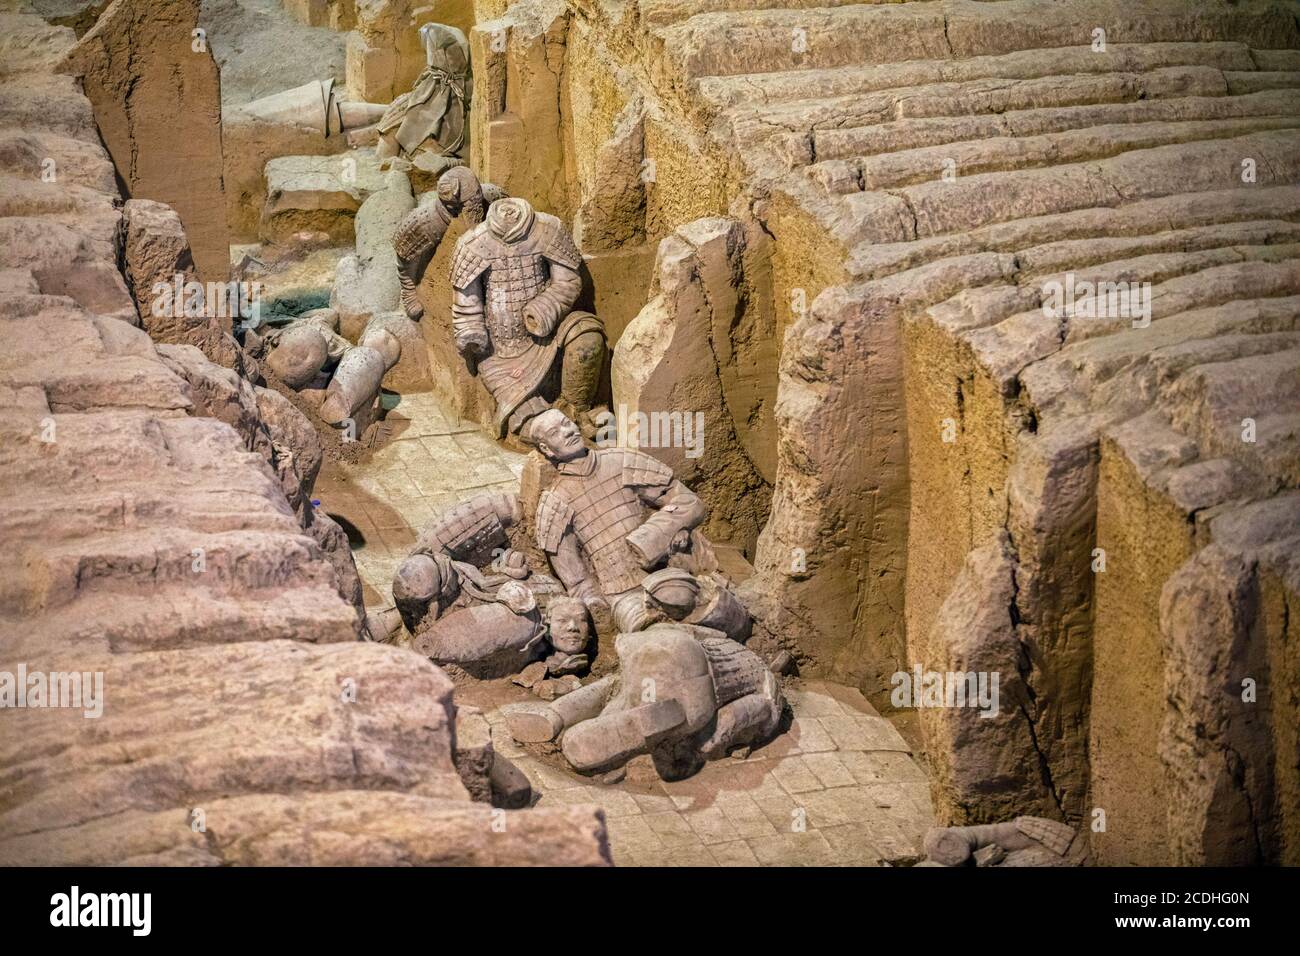 Terracotta Army, sculptures of soldiers depicting the armies of Qin Shi Huang, first Emperor of China near Xi'an / Sian, Lintong District, Shaanxi Stock Photo